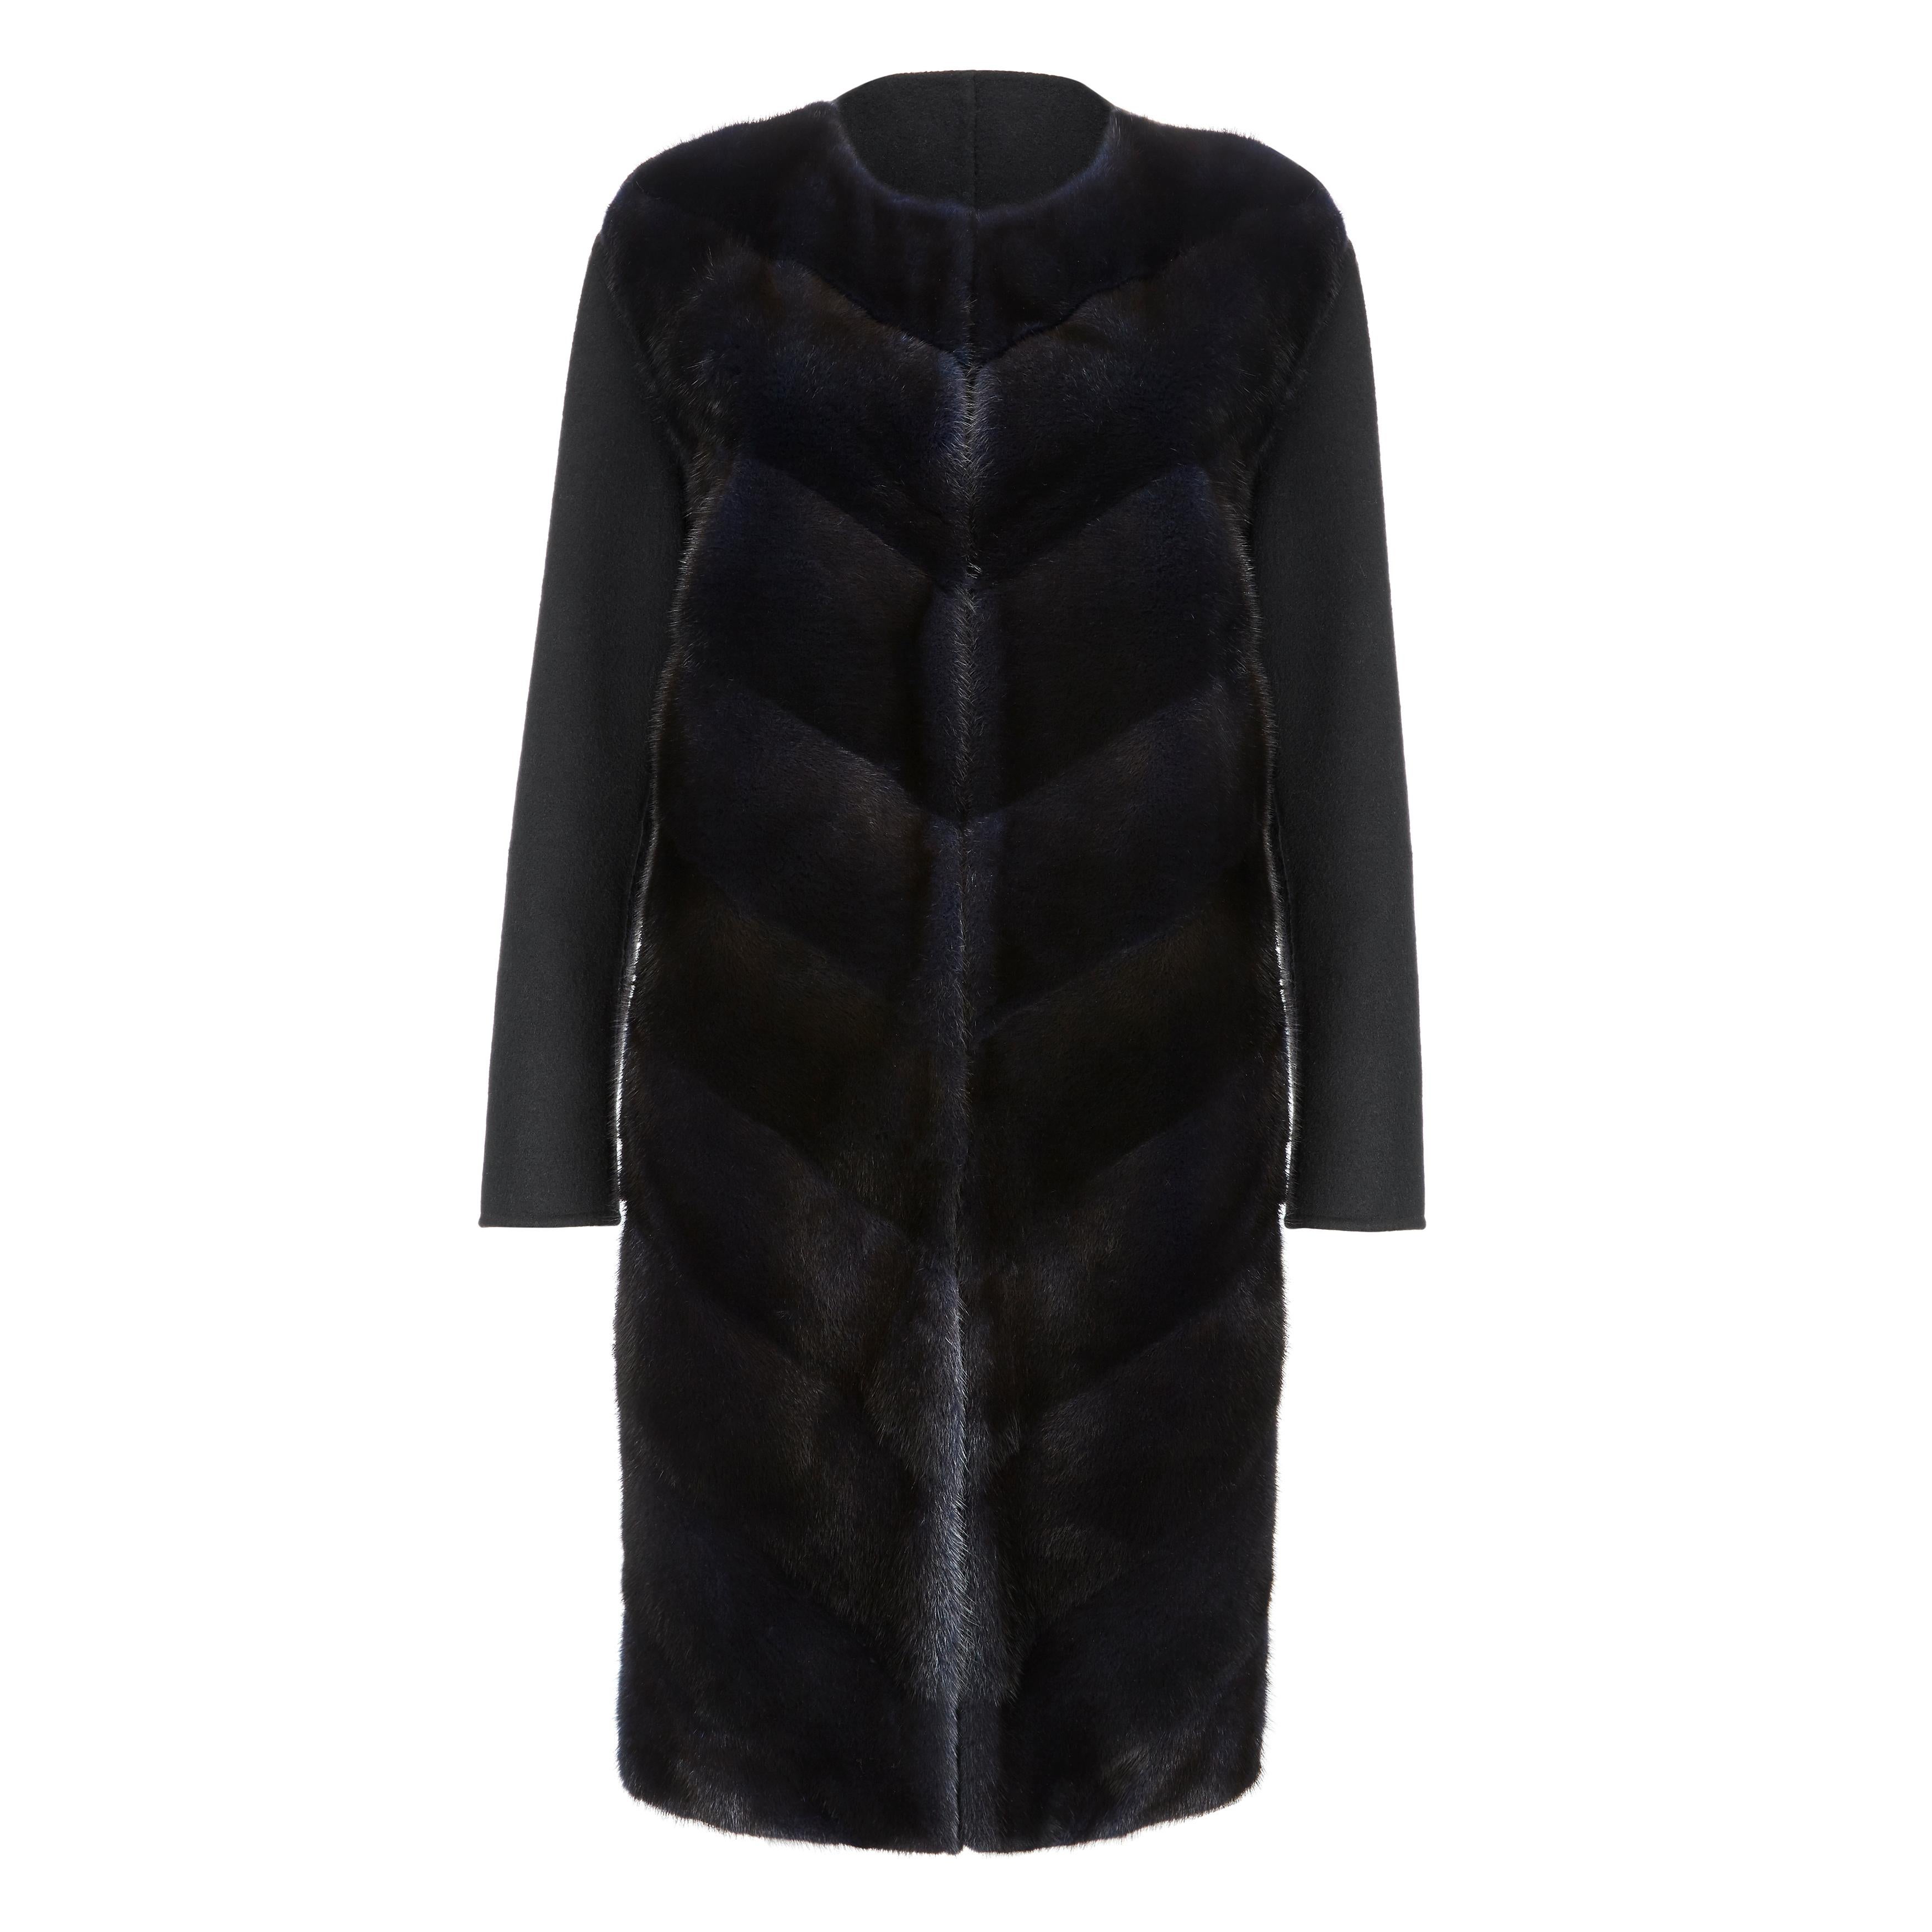 Brand New Collarless Coat Cashmere and in Navy Black Mink Fur